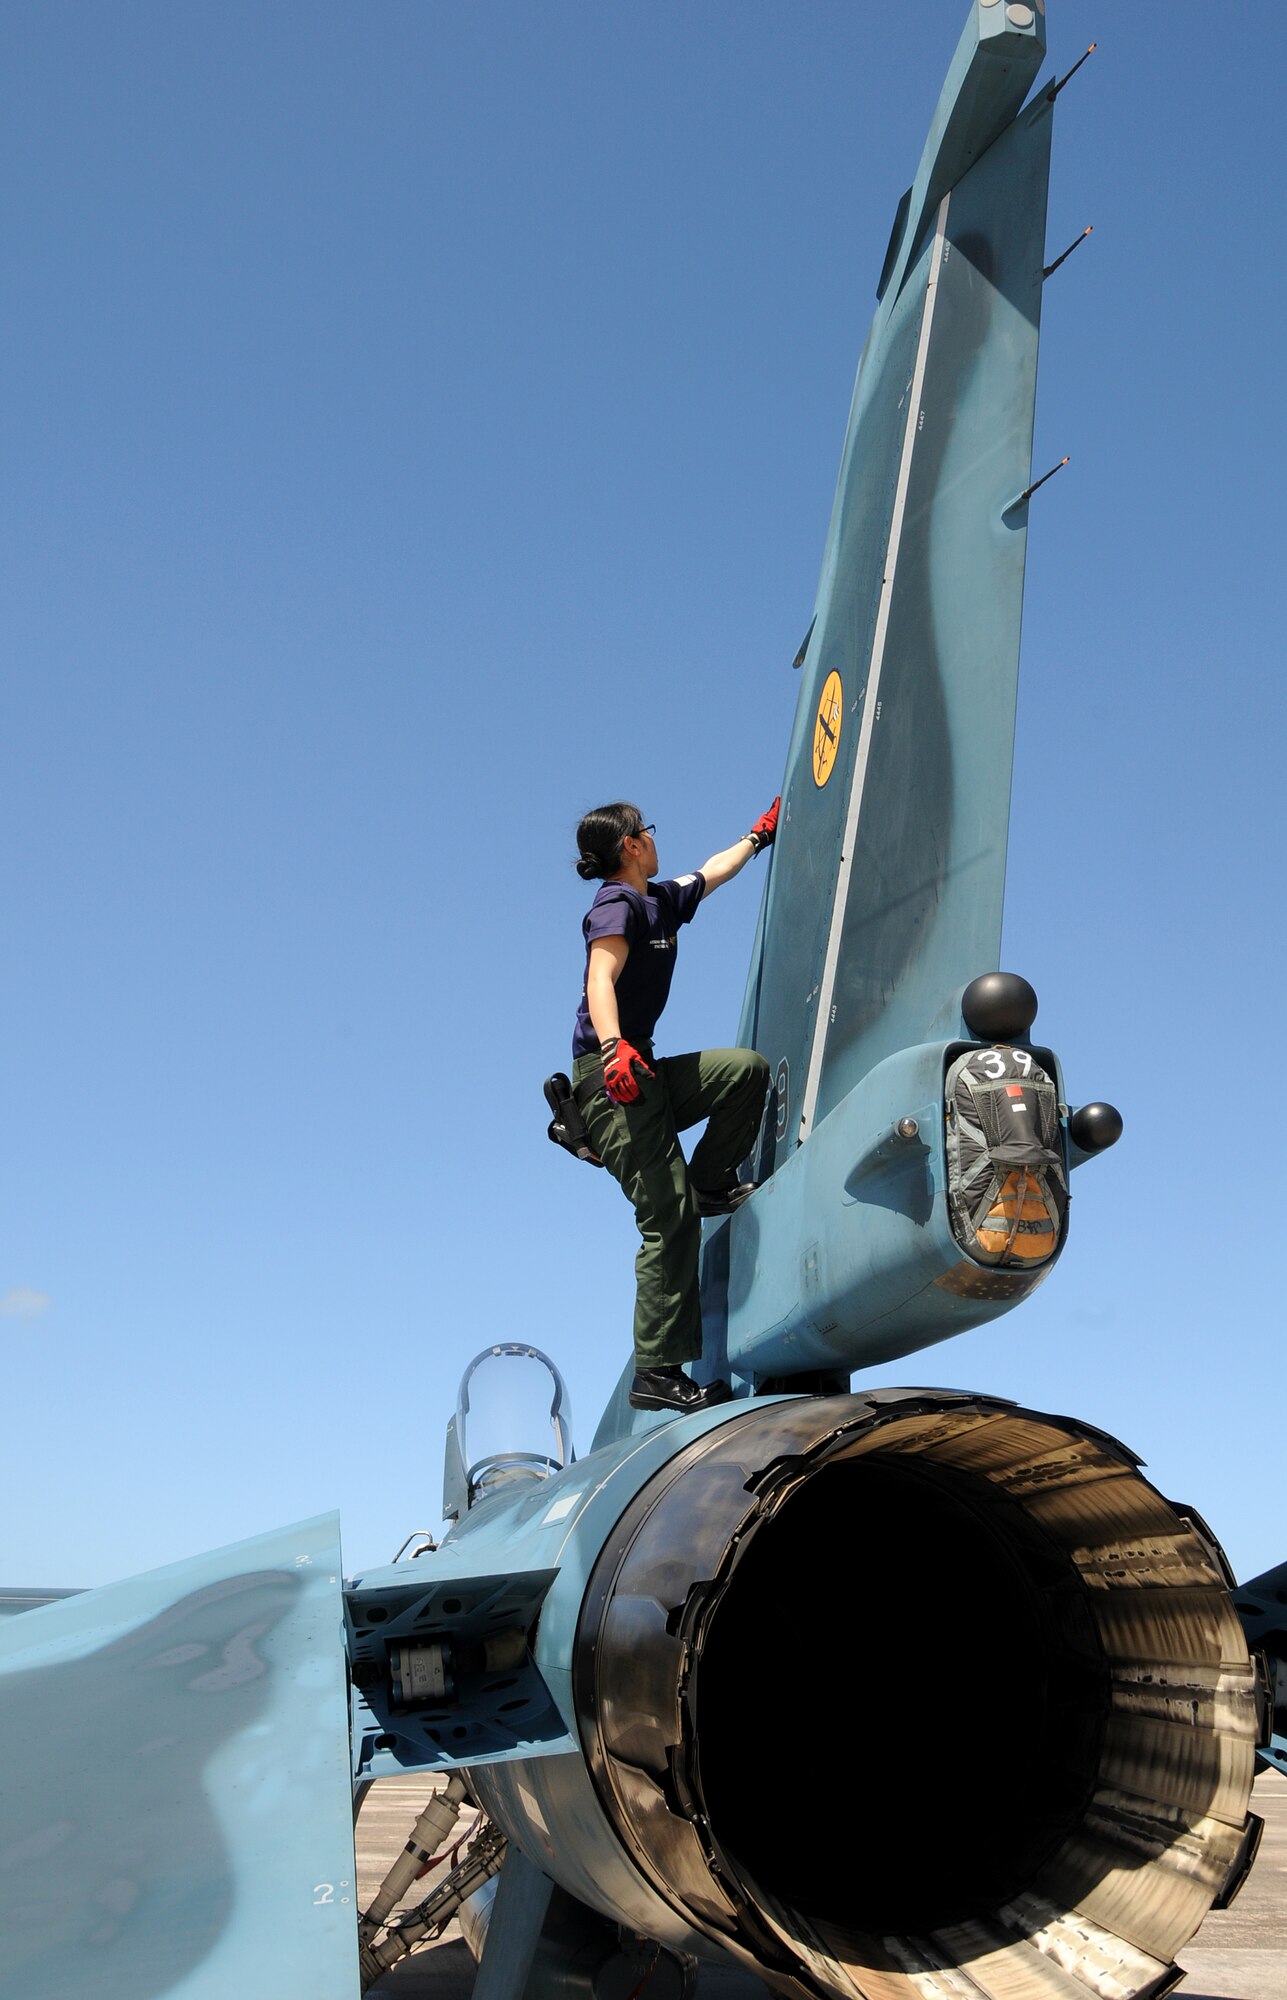 ANDERSEN AIR FORCE BASE, Guam - Japan Air Self Defense Force maintainer Staff Sgt. Teraya Miho inspects the vertical stabilizer of an JASDF F-2 fighter after the aircraft arrived here Jan. 30 for participation in Cope North. This is the tenth time the United States and Japan have held a Cope North exercise on Guam, and it will be the fourth time that the JASDF will use live ordnance. (U.S. Air Force photo by Airman 1st Class Courtney Witt)